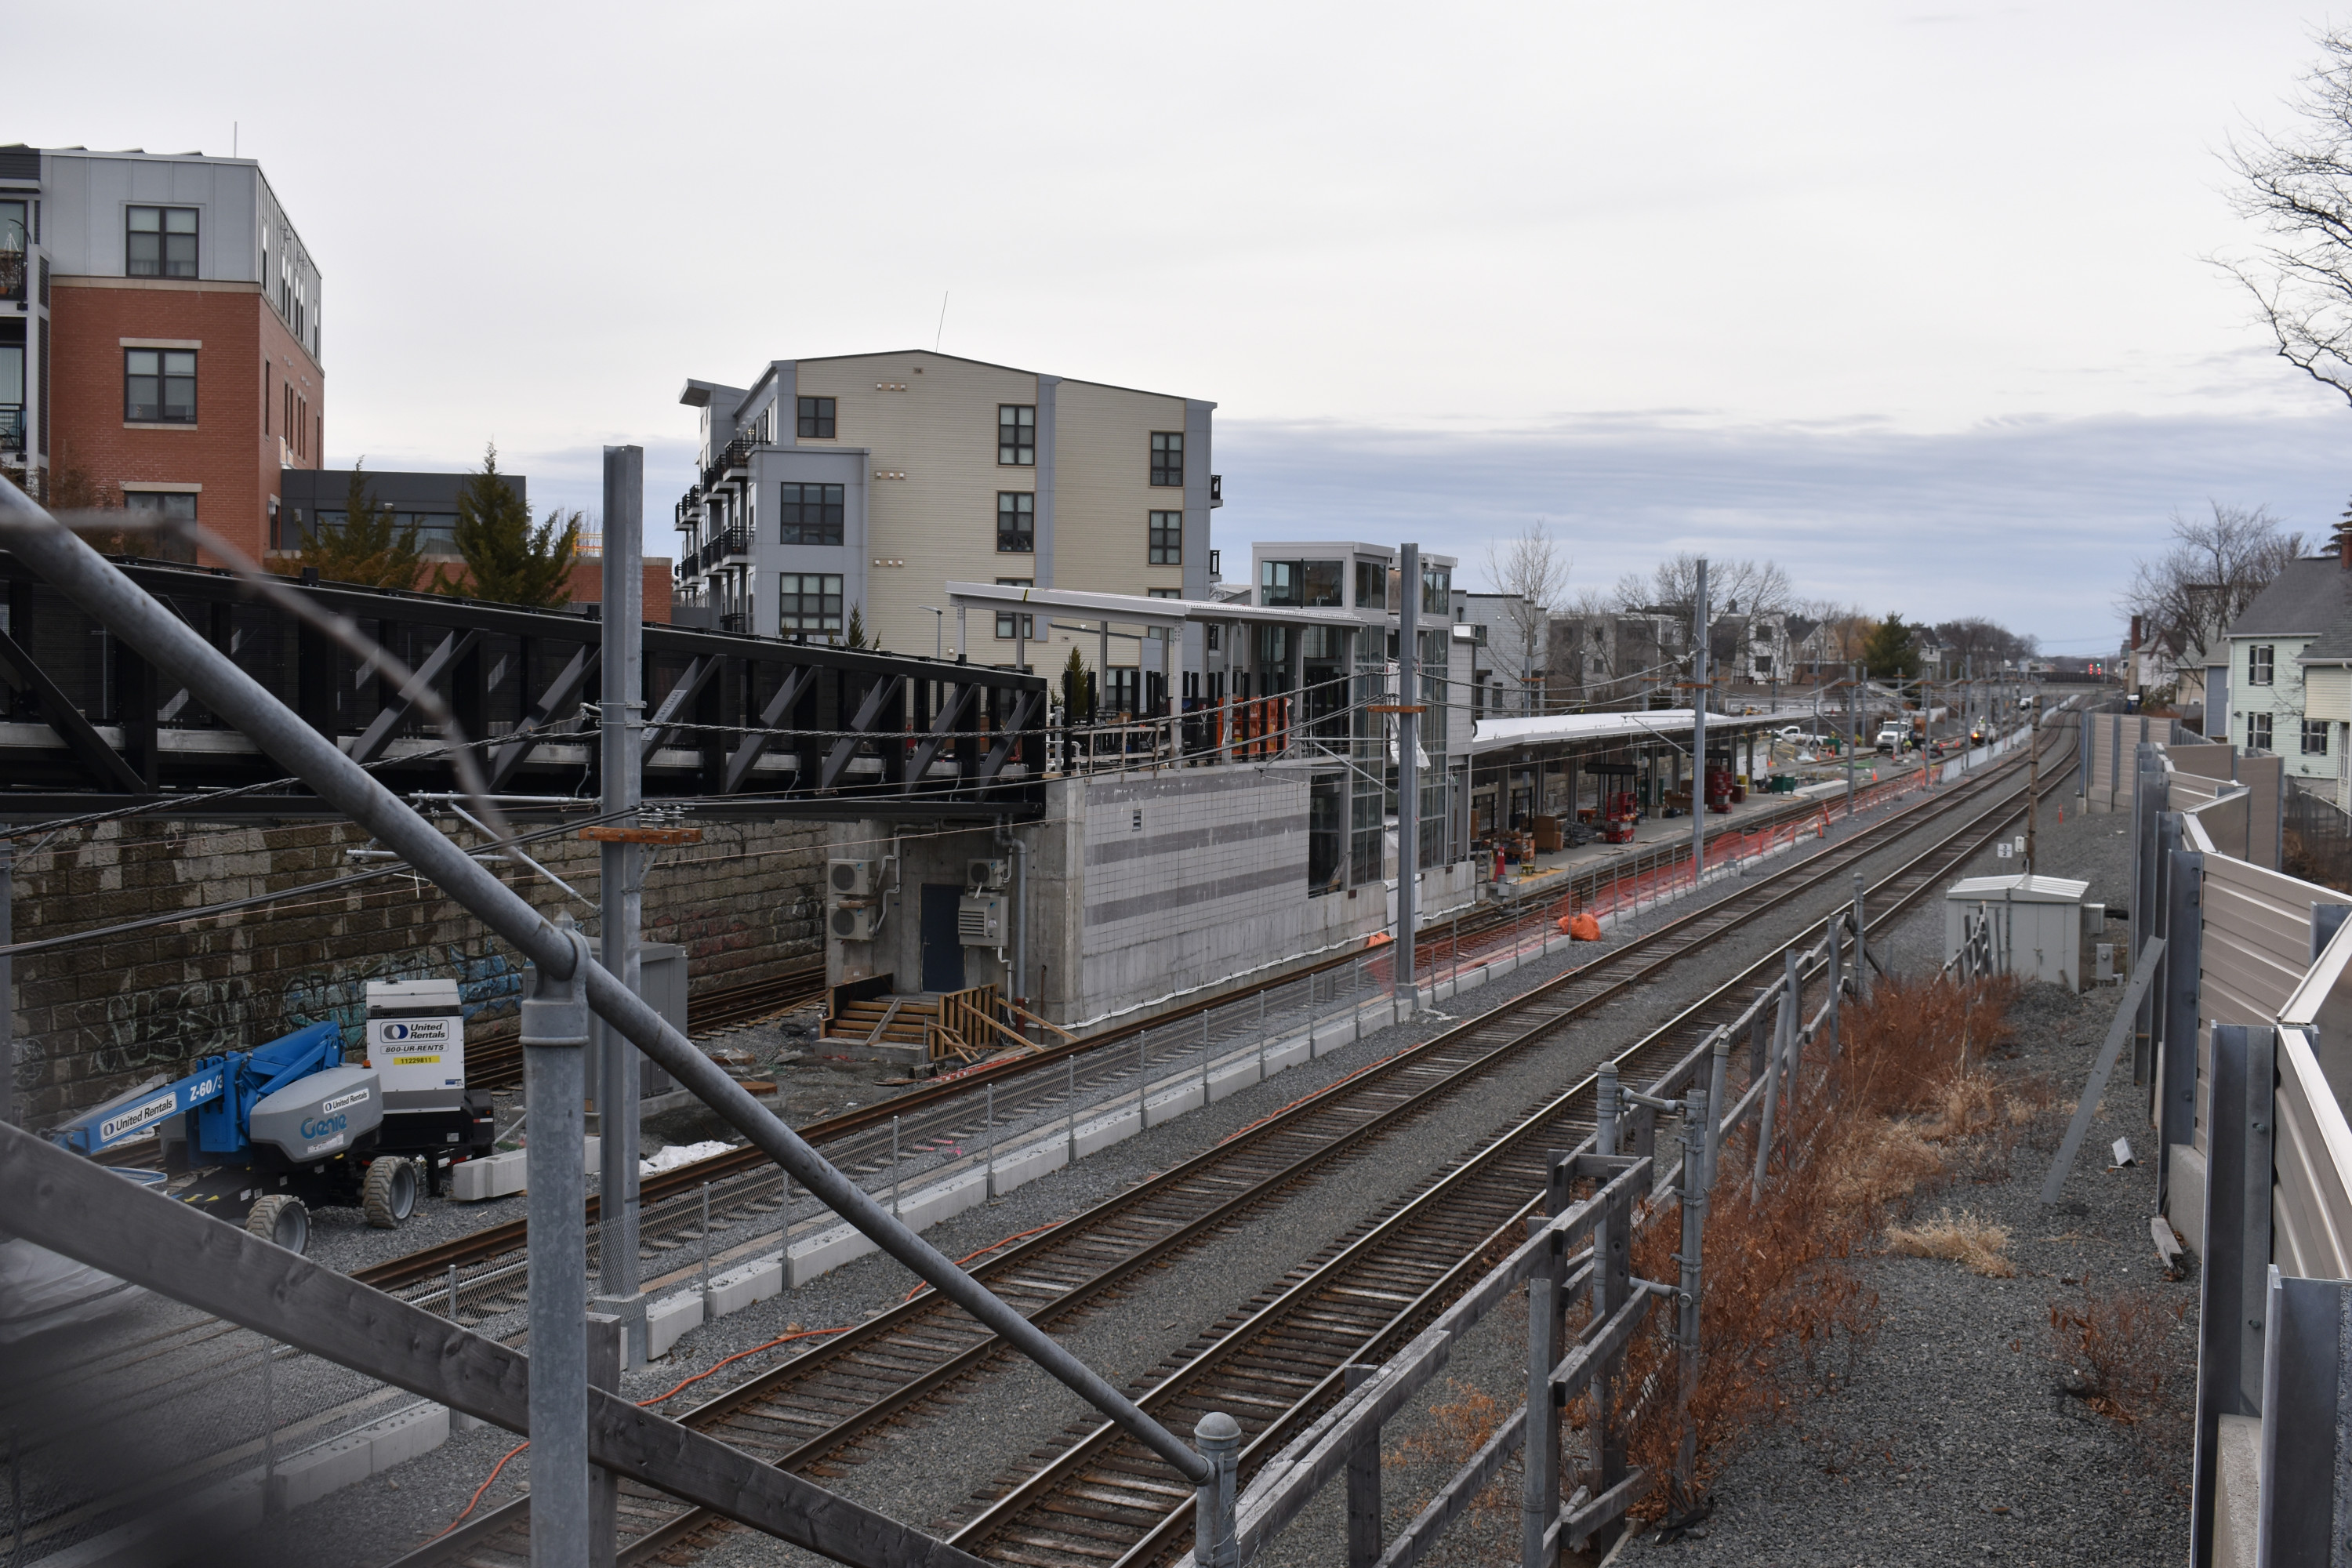 The new Magoun Square Green Line station under construction, seen from Lowell Street. This station is on the longer Medford branch of the Green Line Extension, which is expected to open later this year.